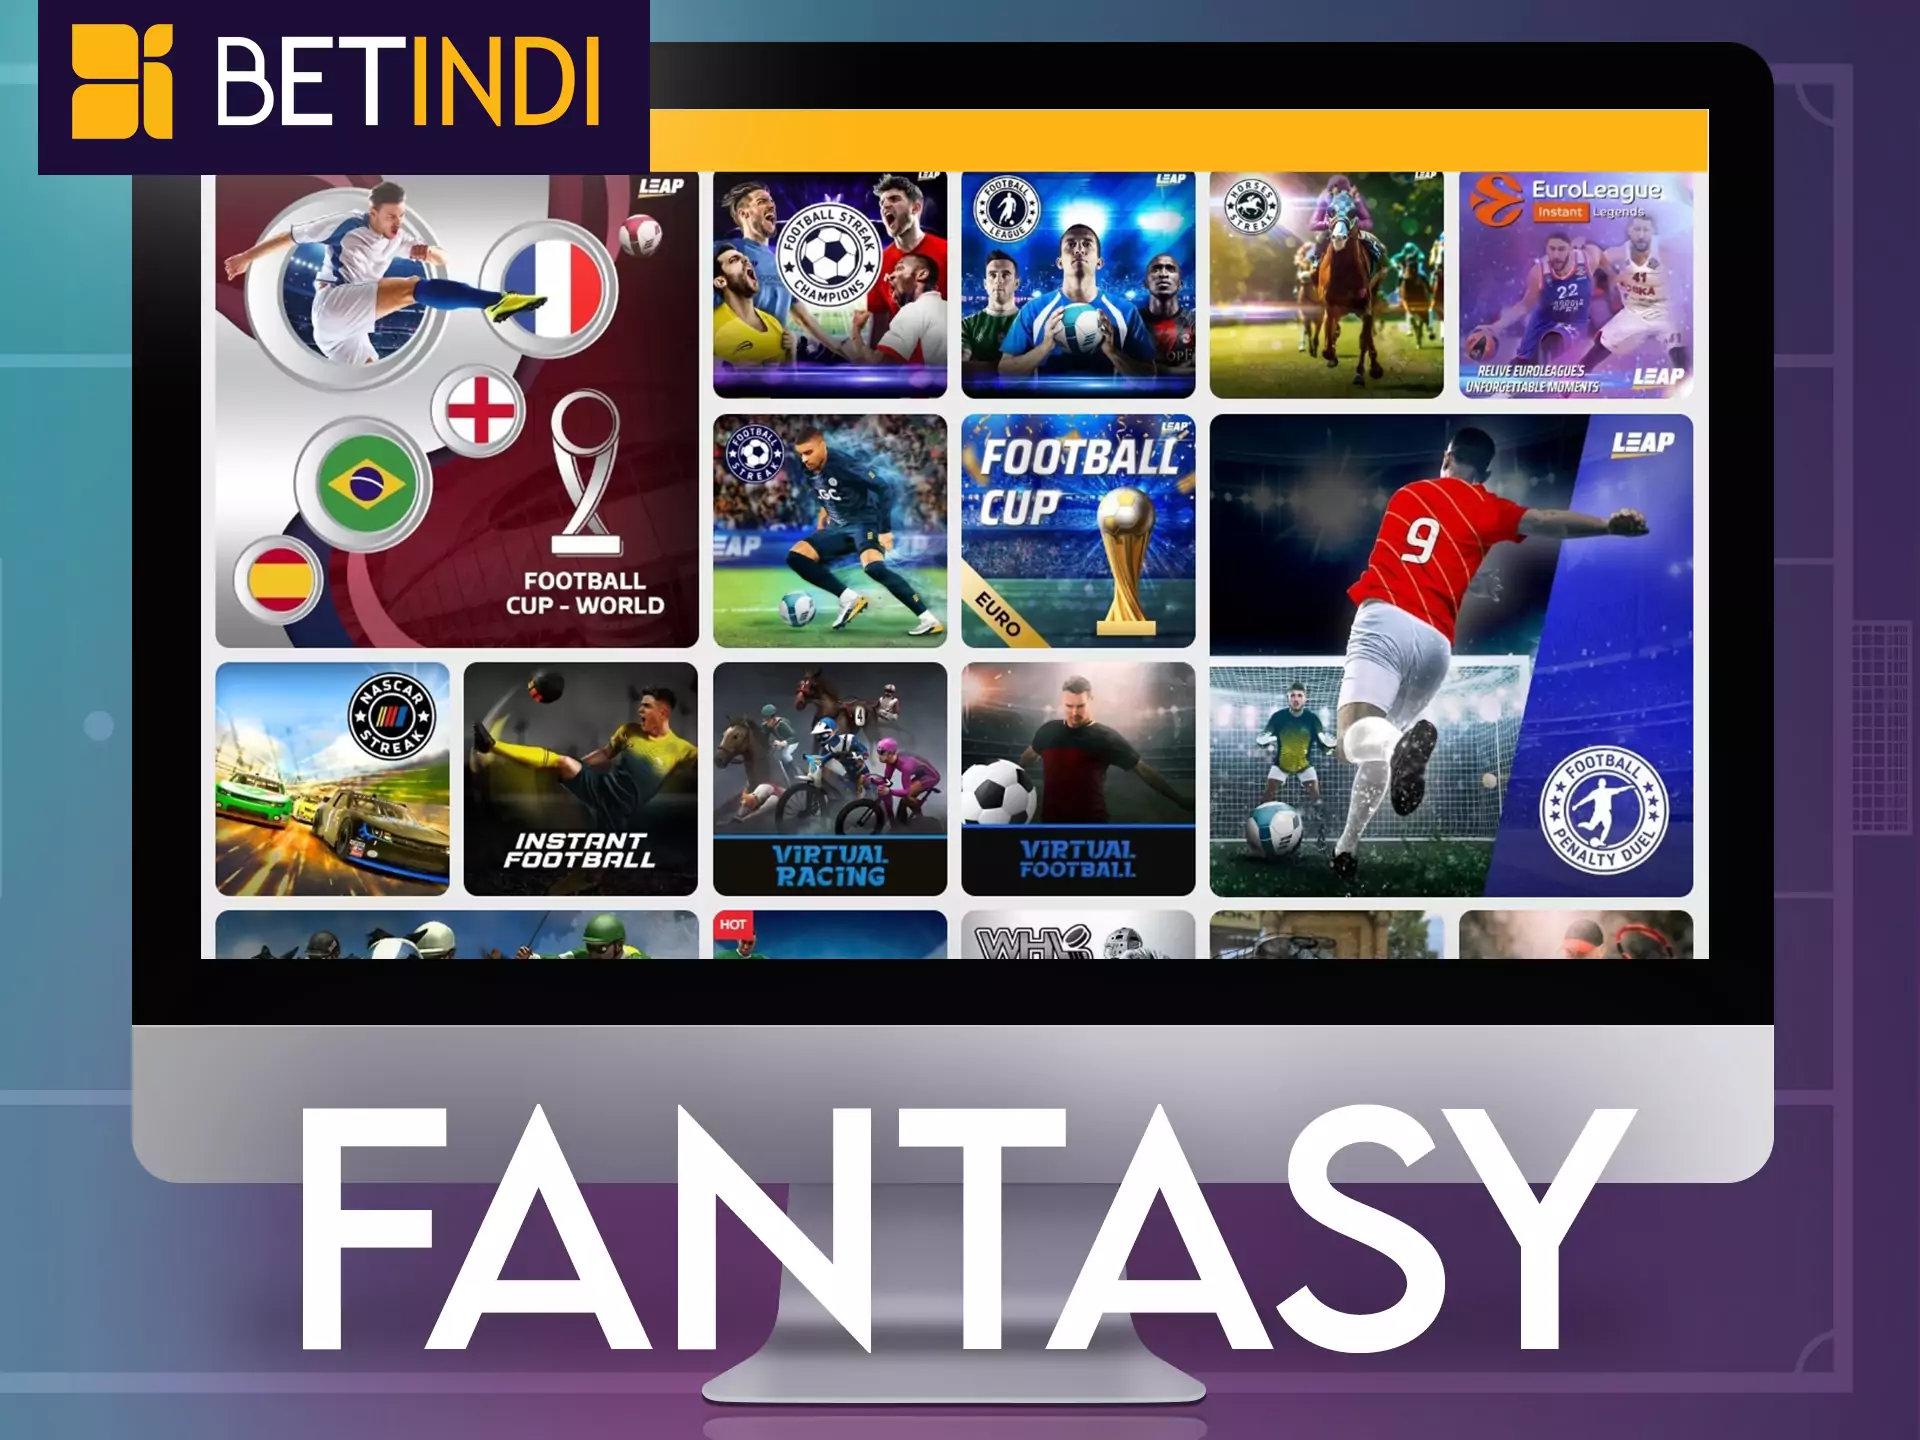 Fantasy sports betting on Betindi, choose the parameters yourself.